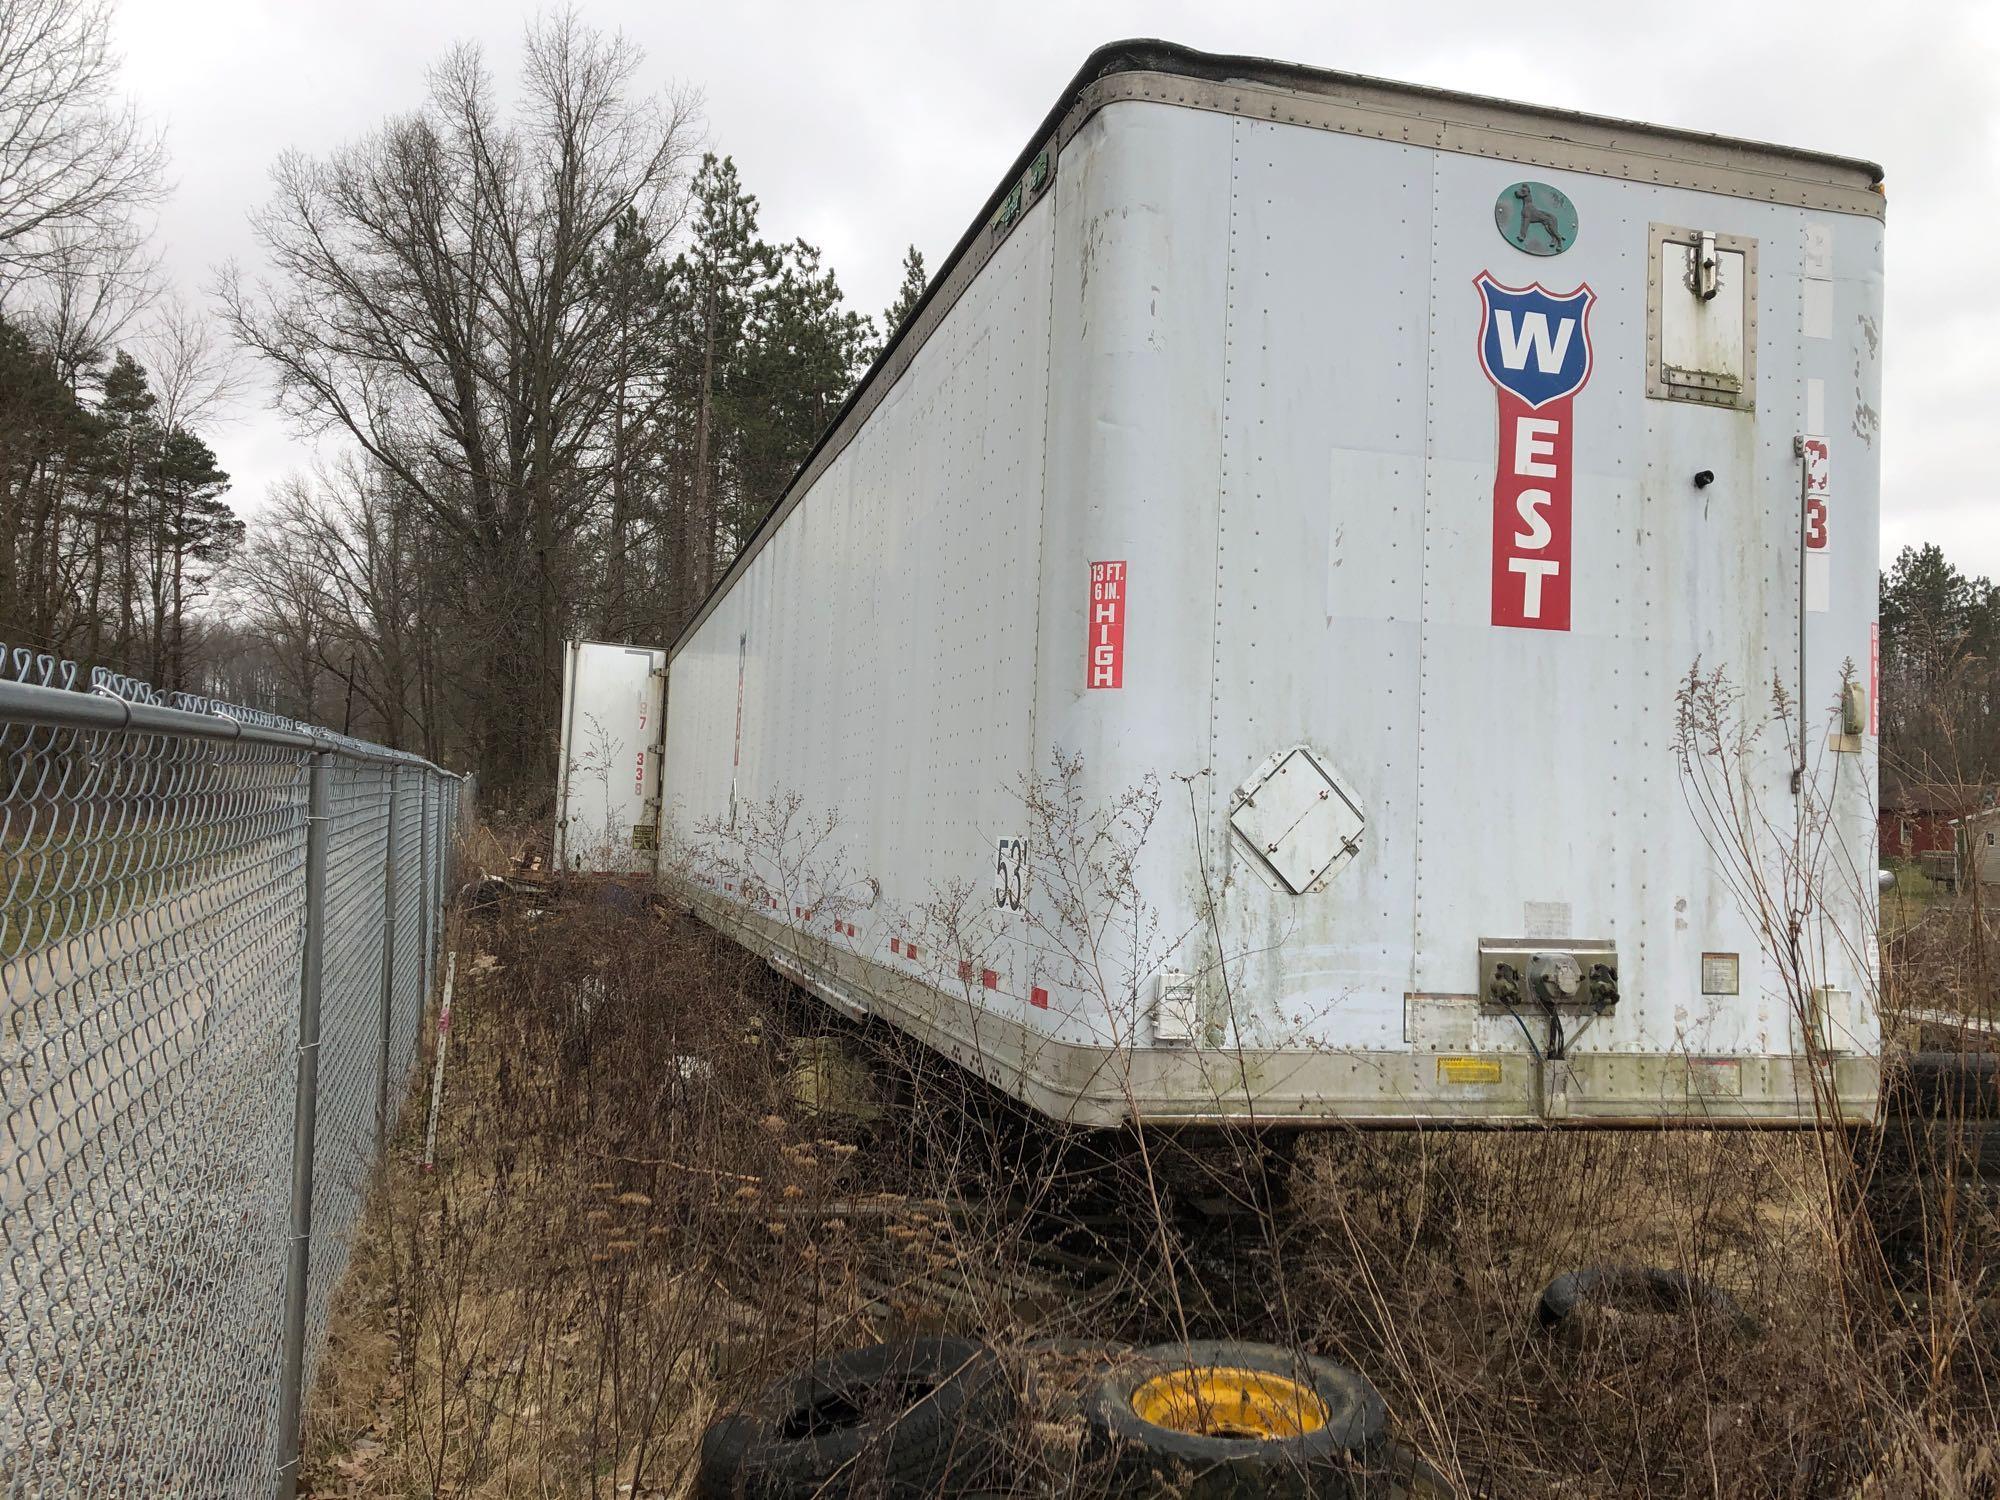 Great Dane 53' semi trailer for storage only